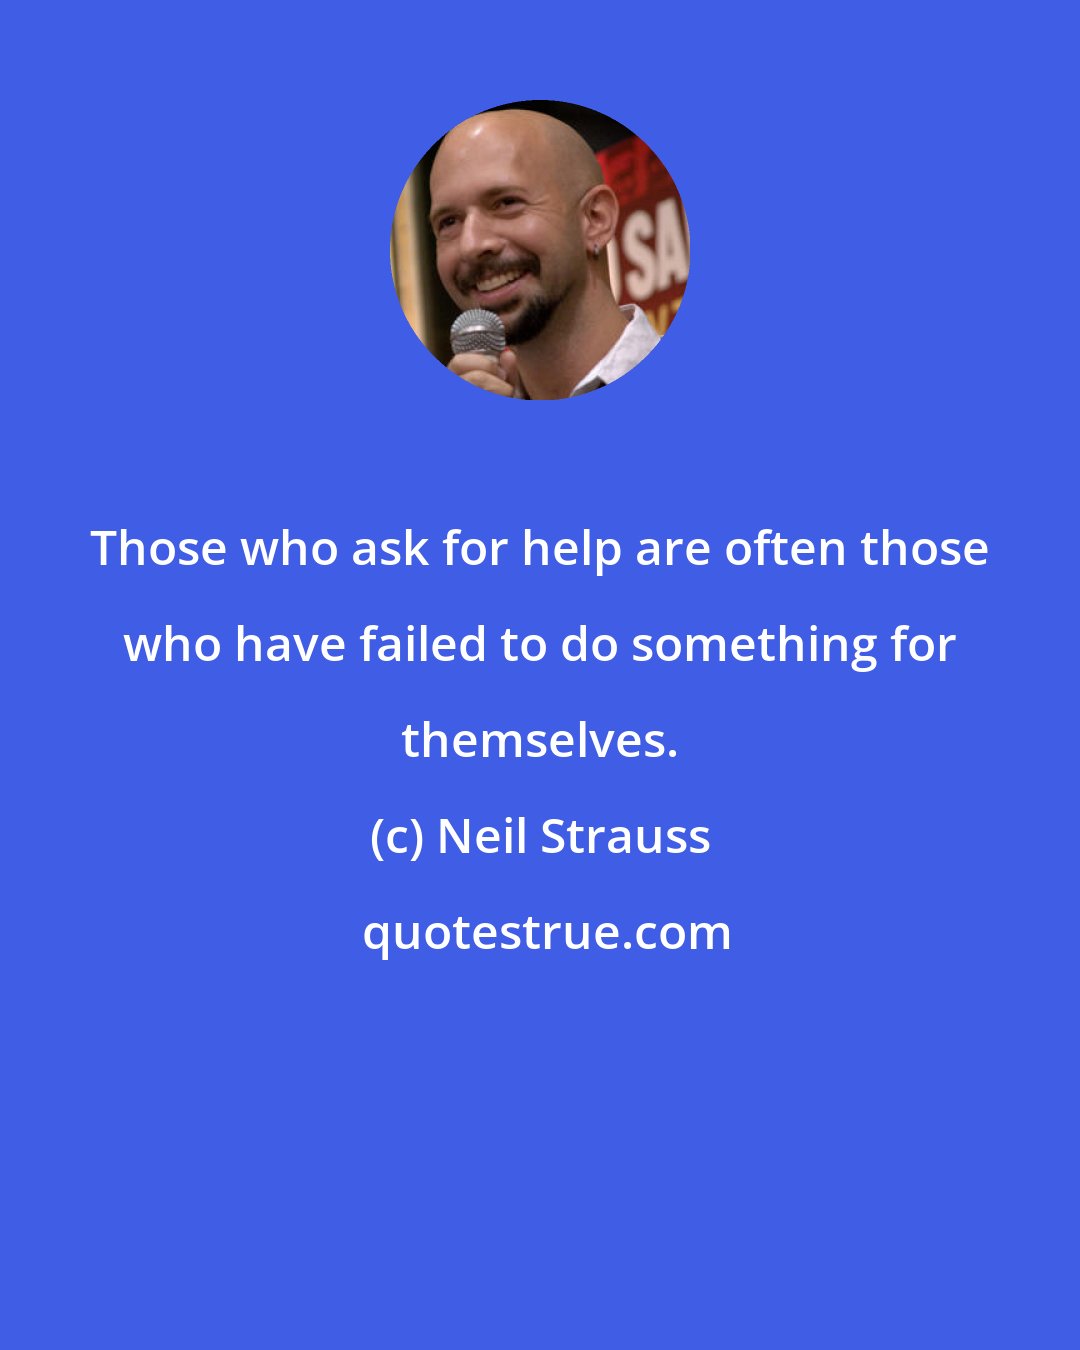 Neil Strauss: Those who ask for help are often those who have failed to do something for themselves.